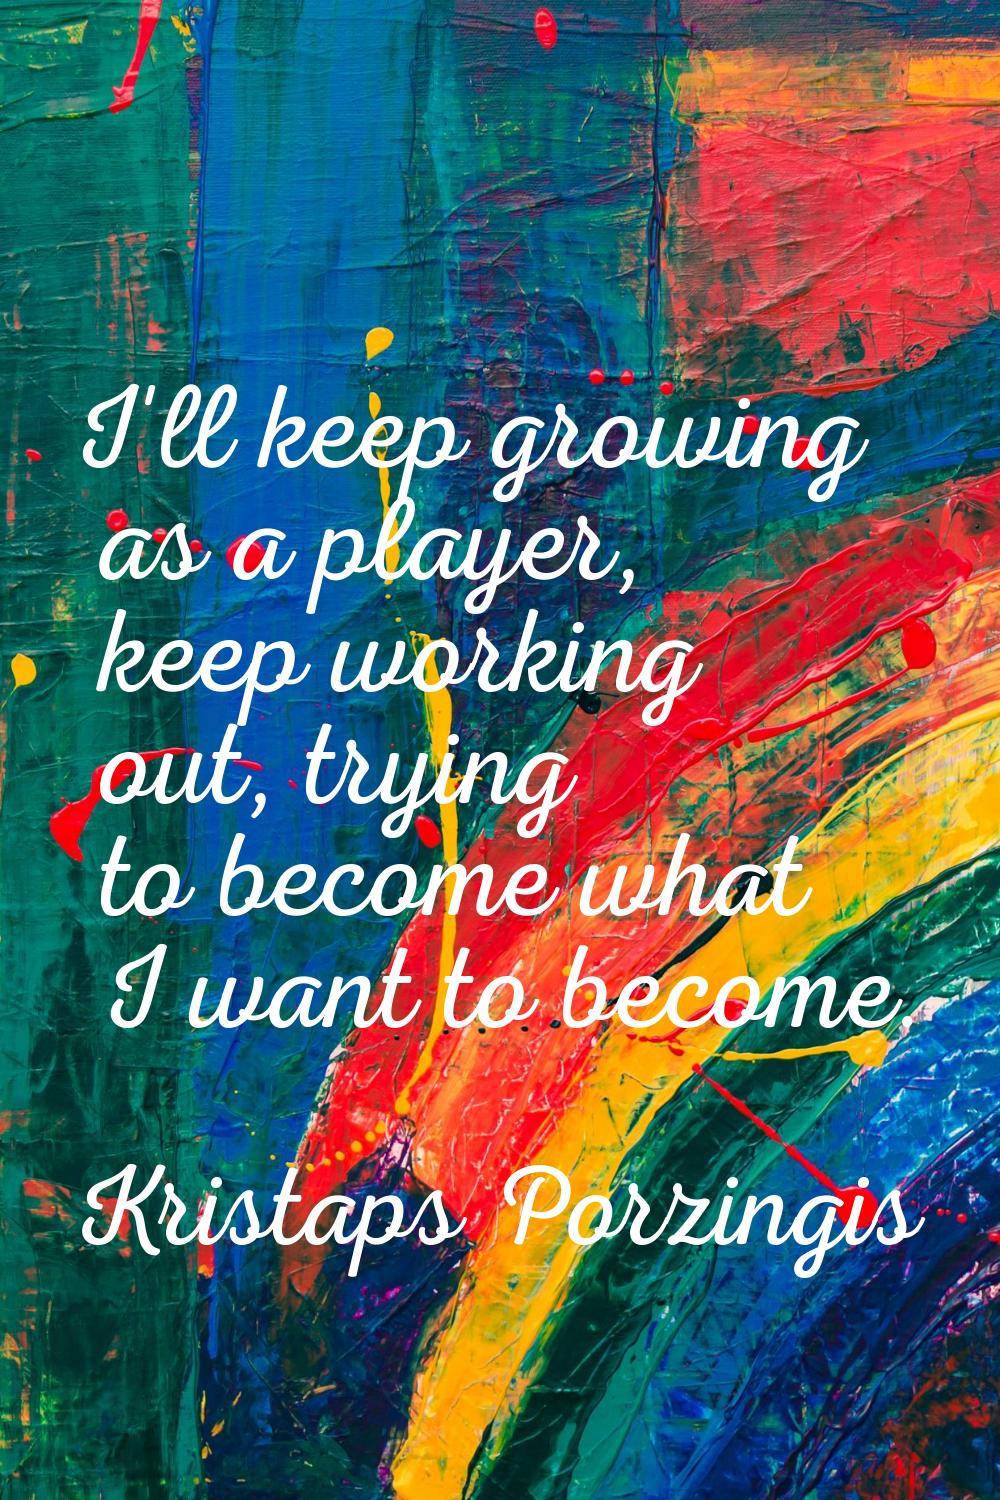 I'll keep growing as a player, keep working out, trying to become what I want to become.